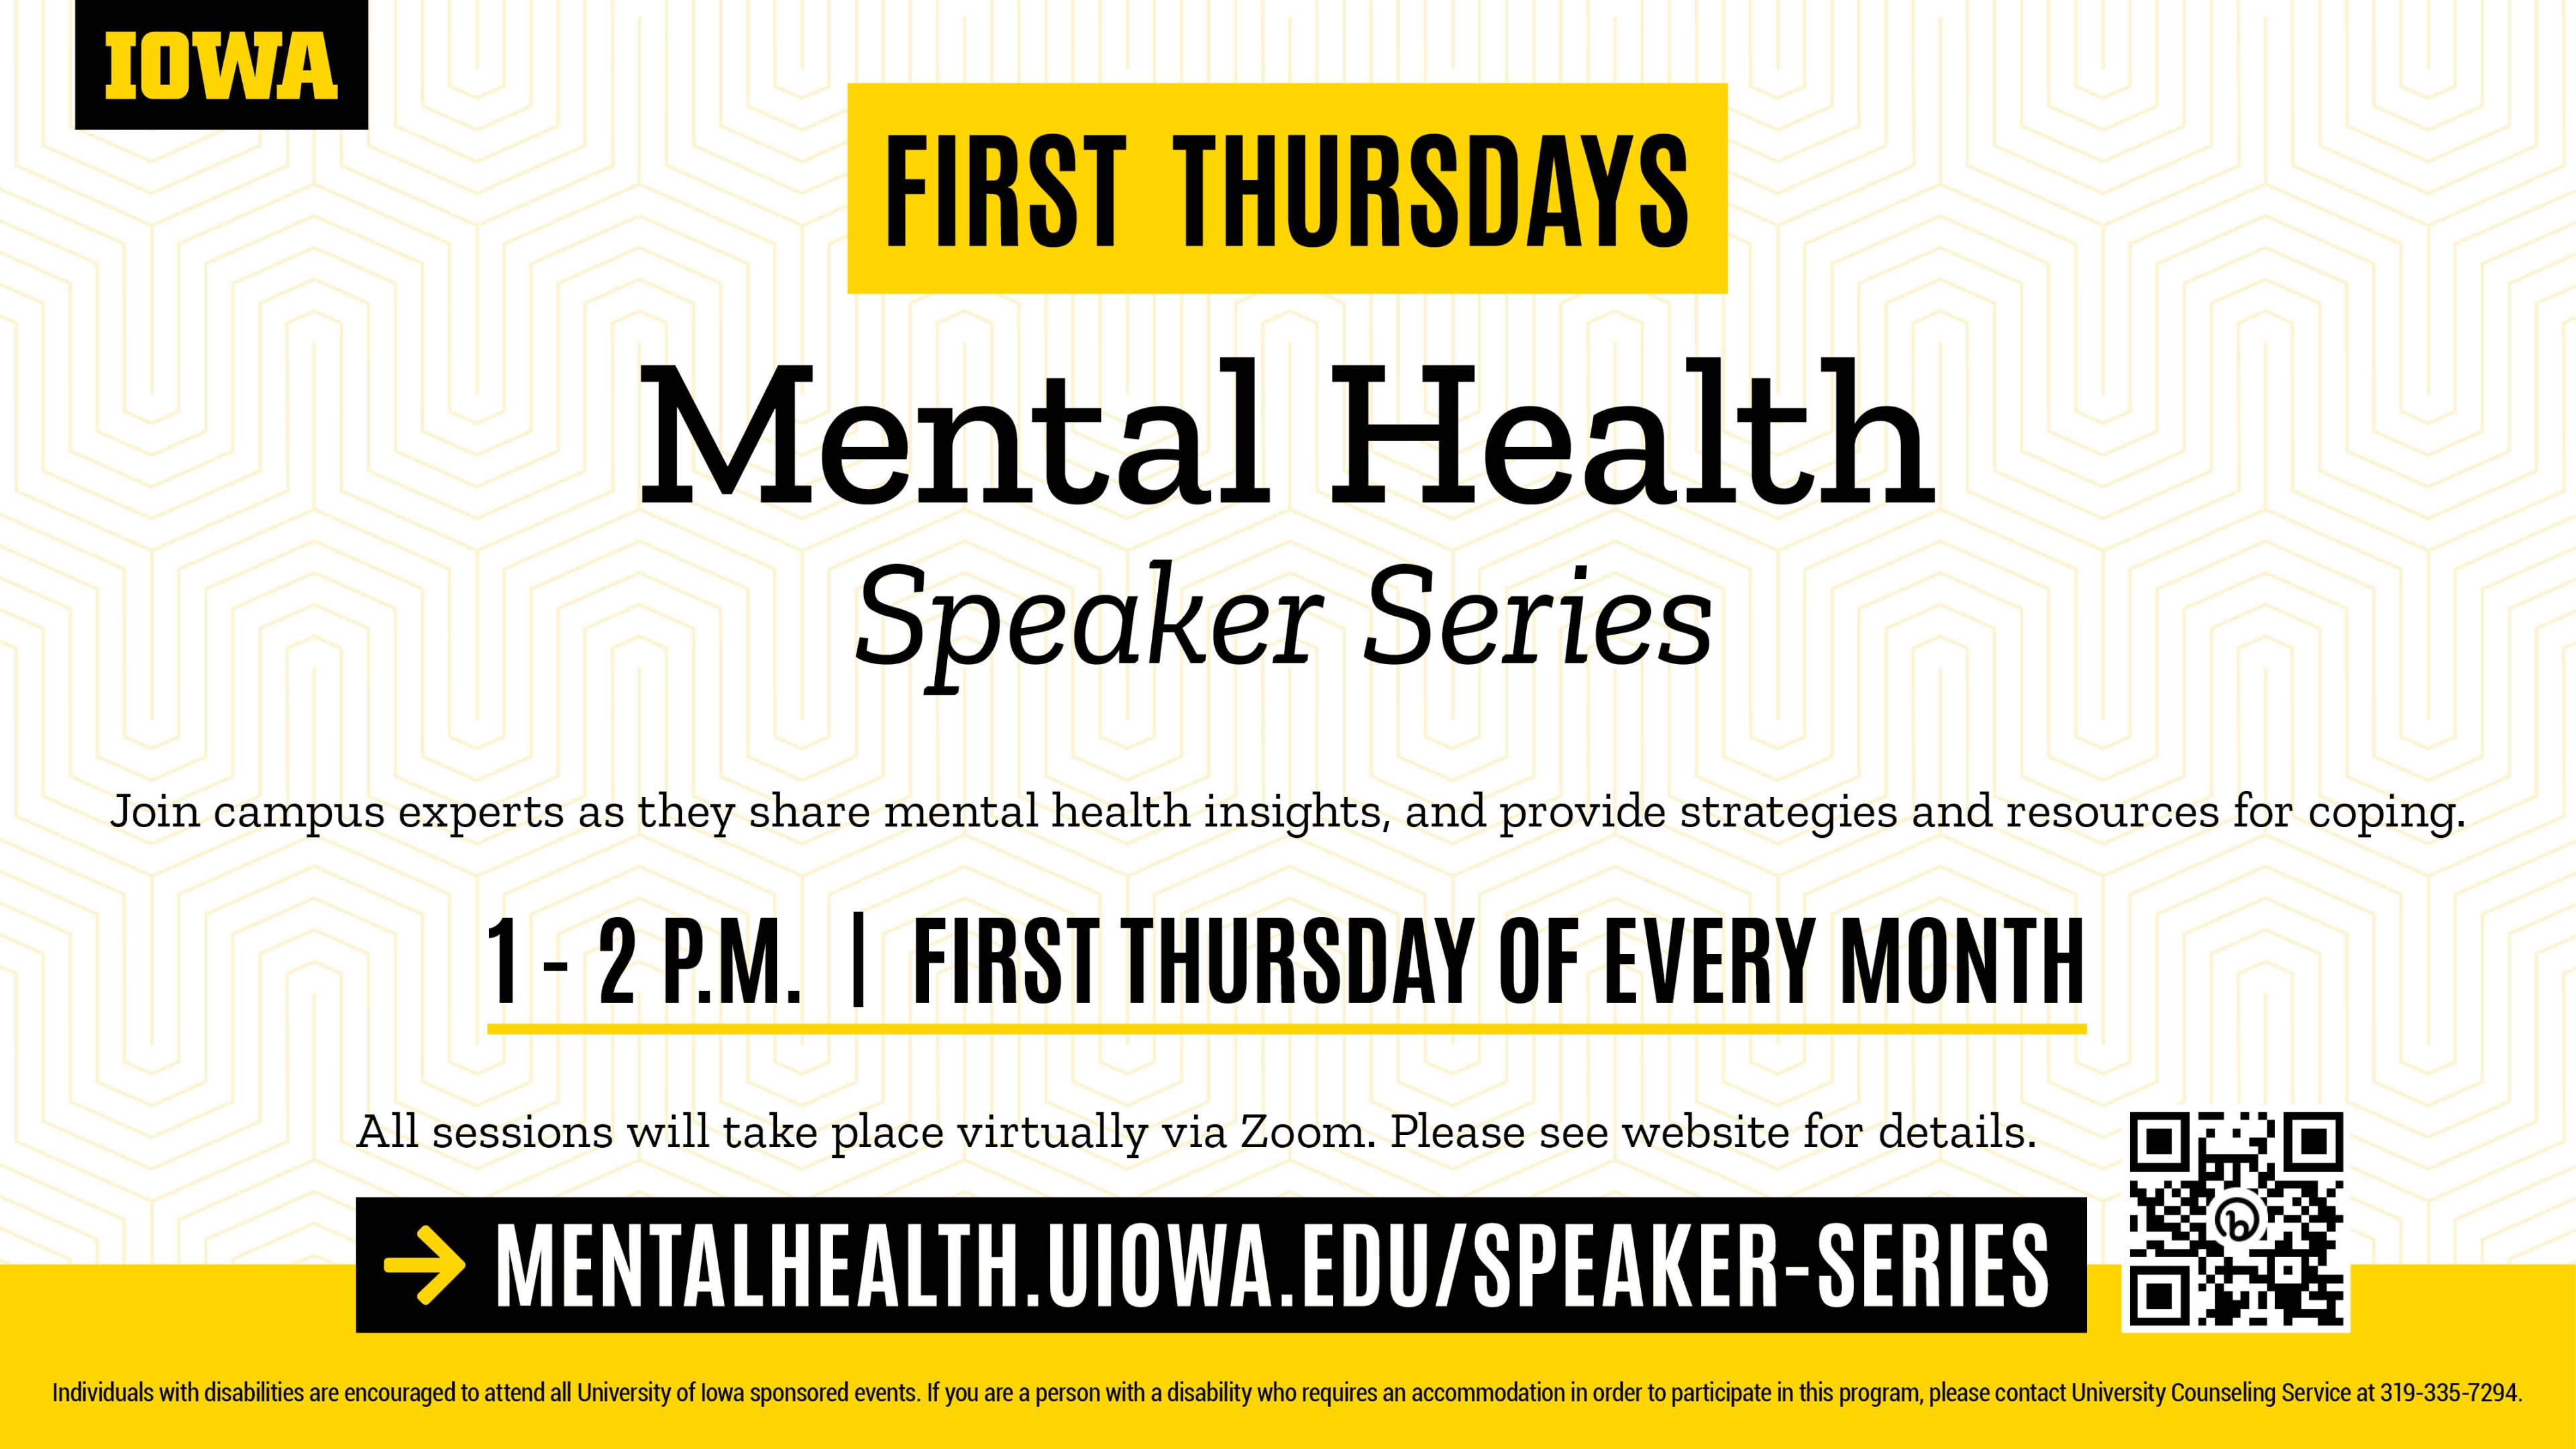 Mental Health Speaker Series – First Thursday every month, 1-2pm